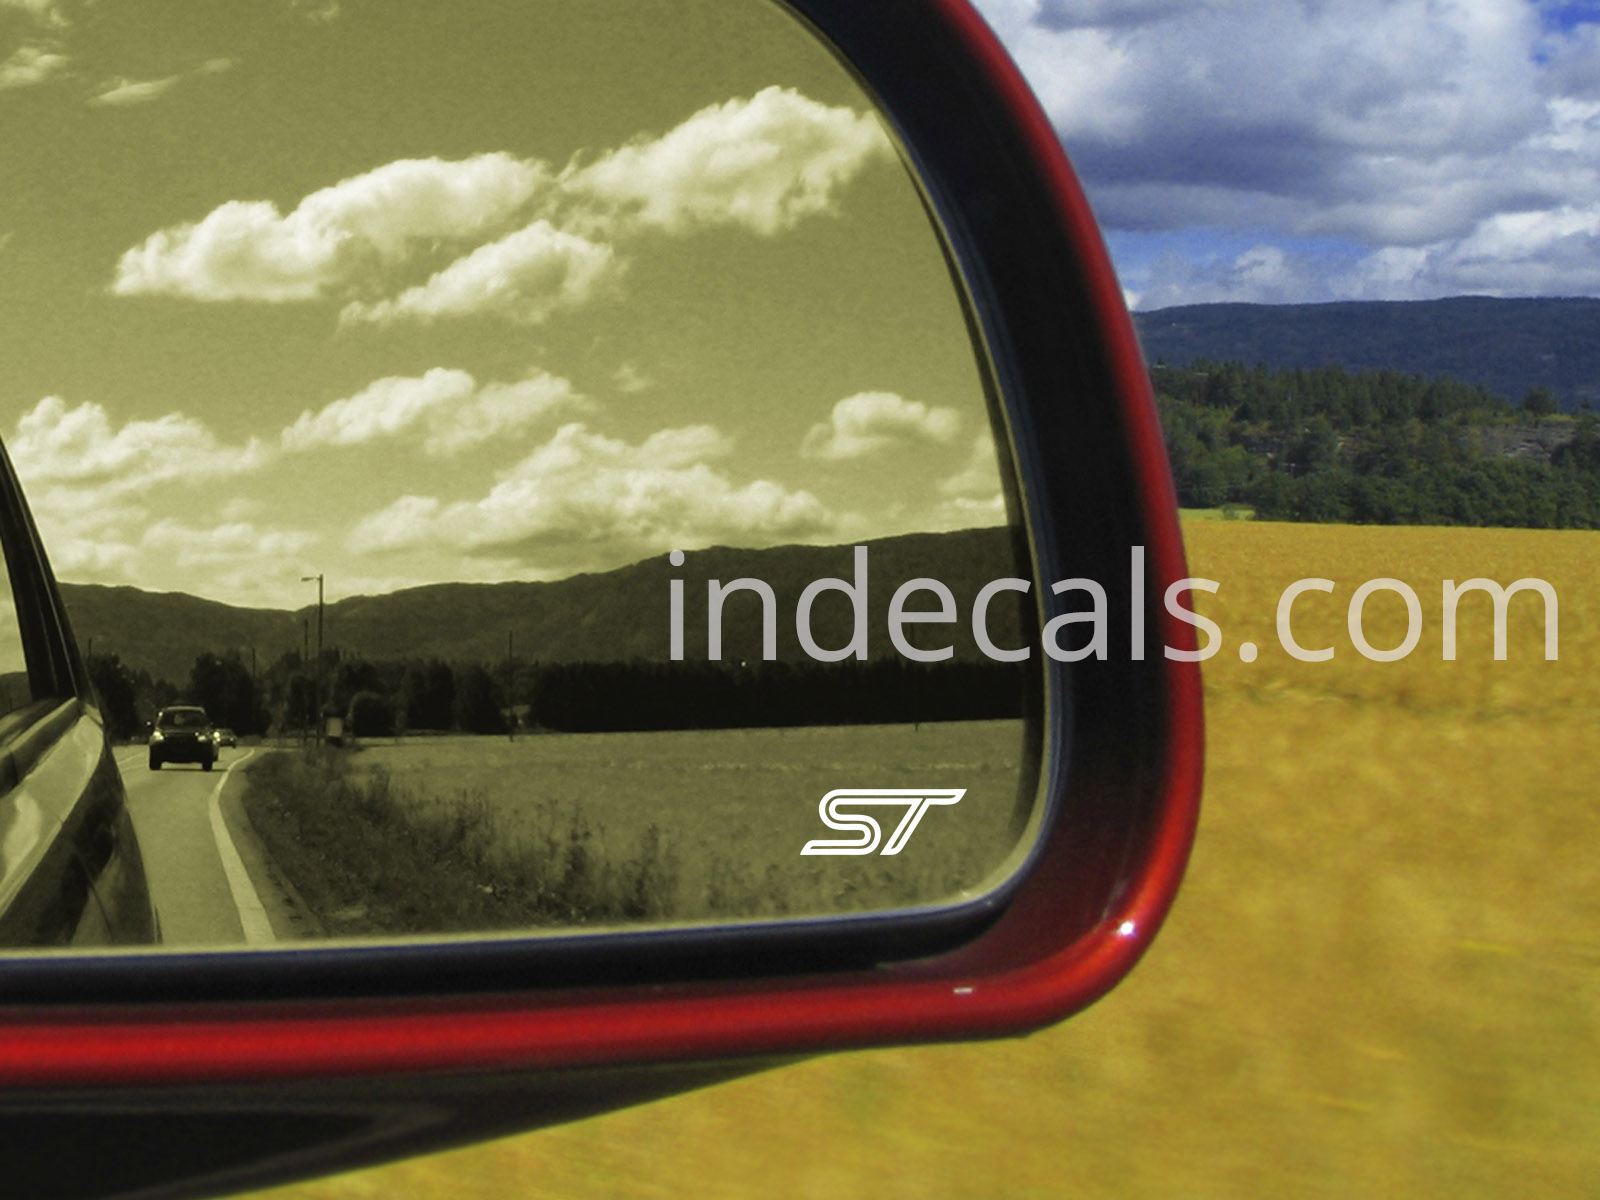 3 x Ford ST Stickers for Mirror Glass - White